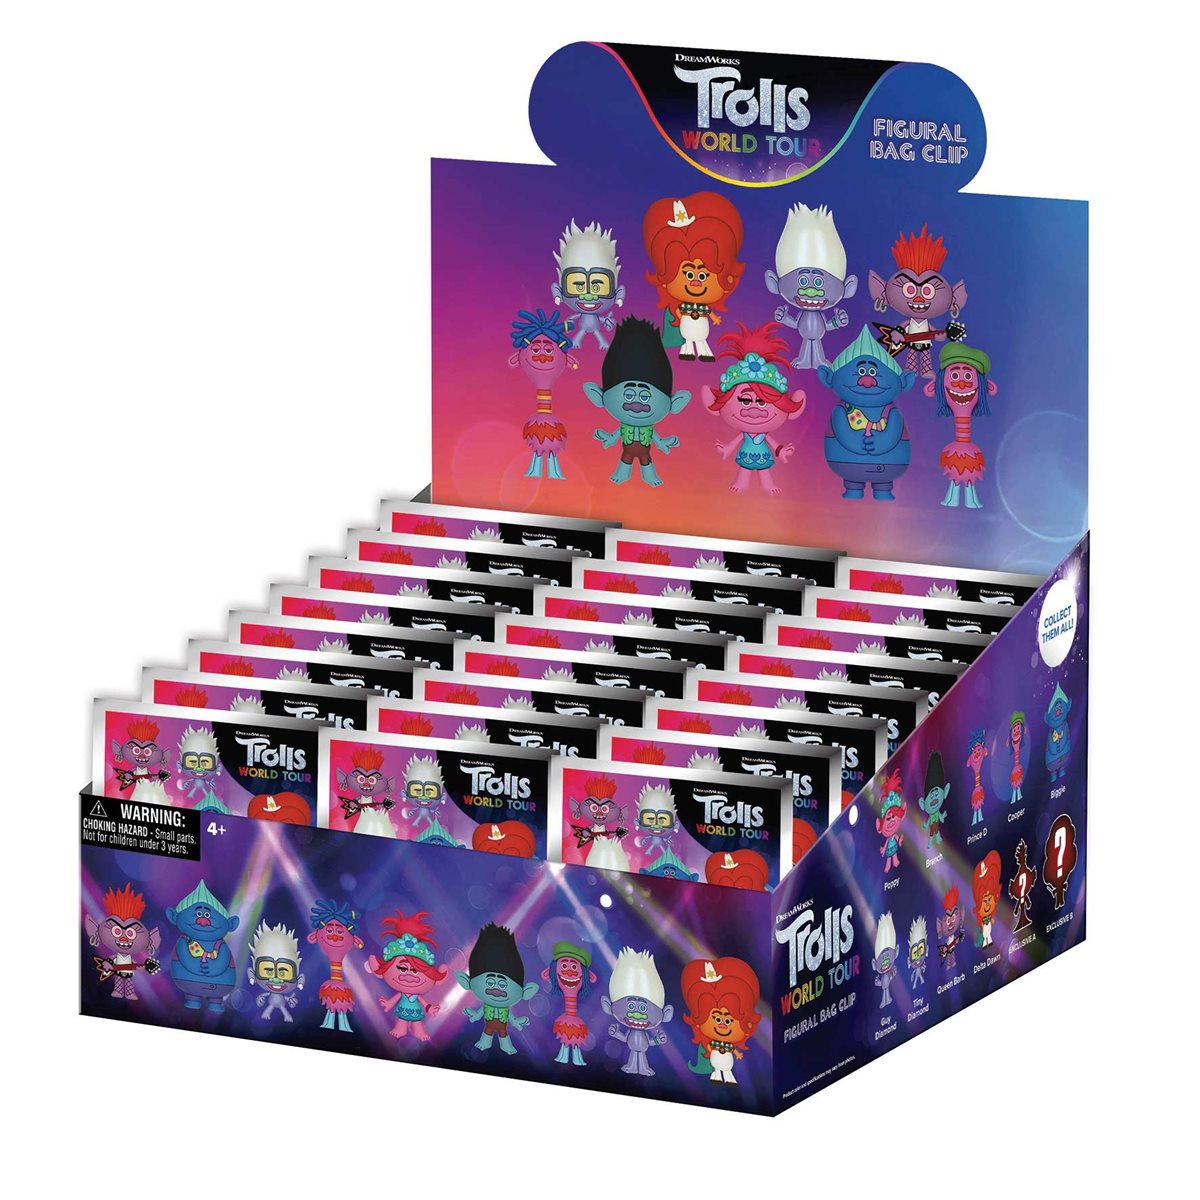 Trolls 2 World Tour Foam Puzzle for Kids Ages 4 and up